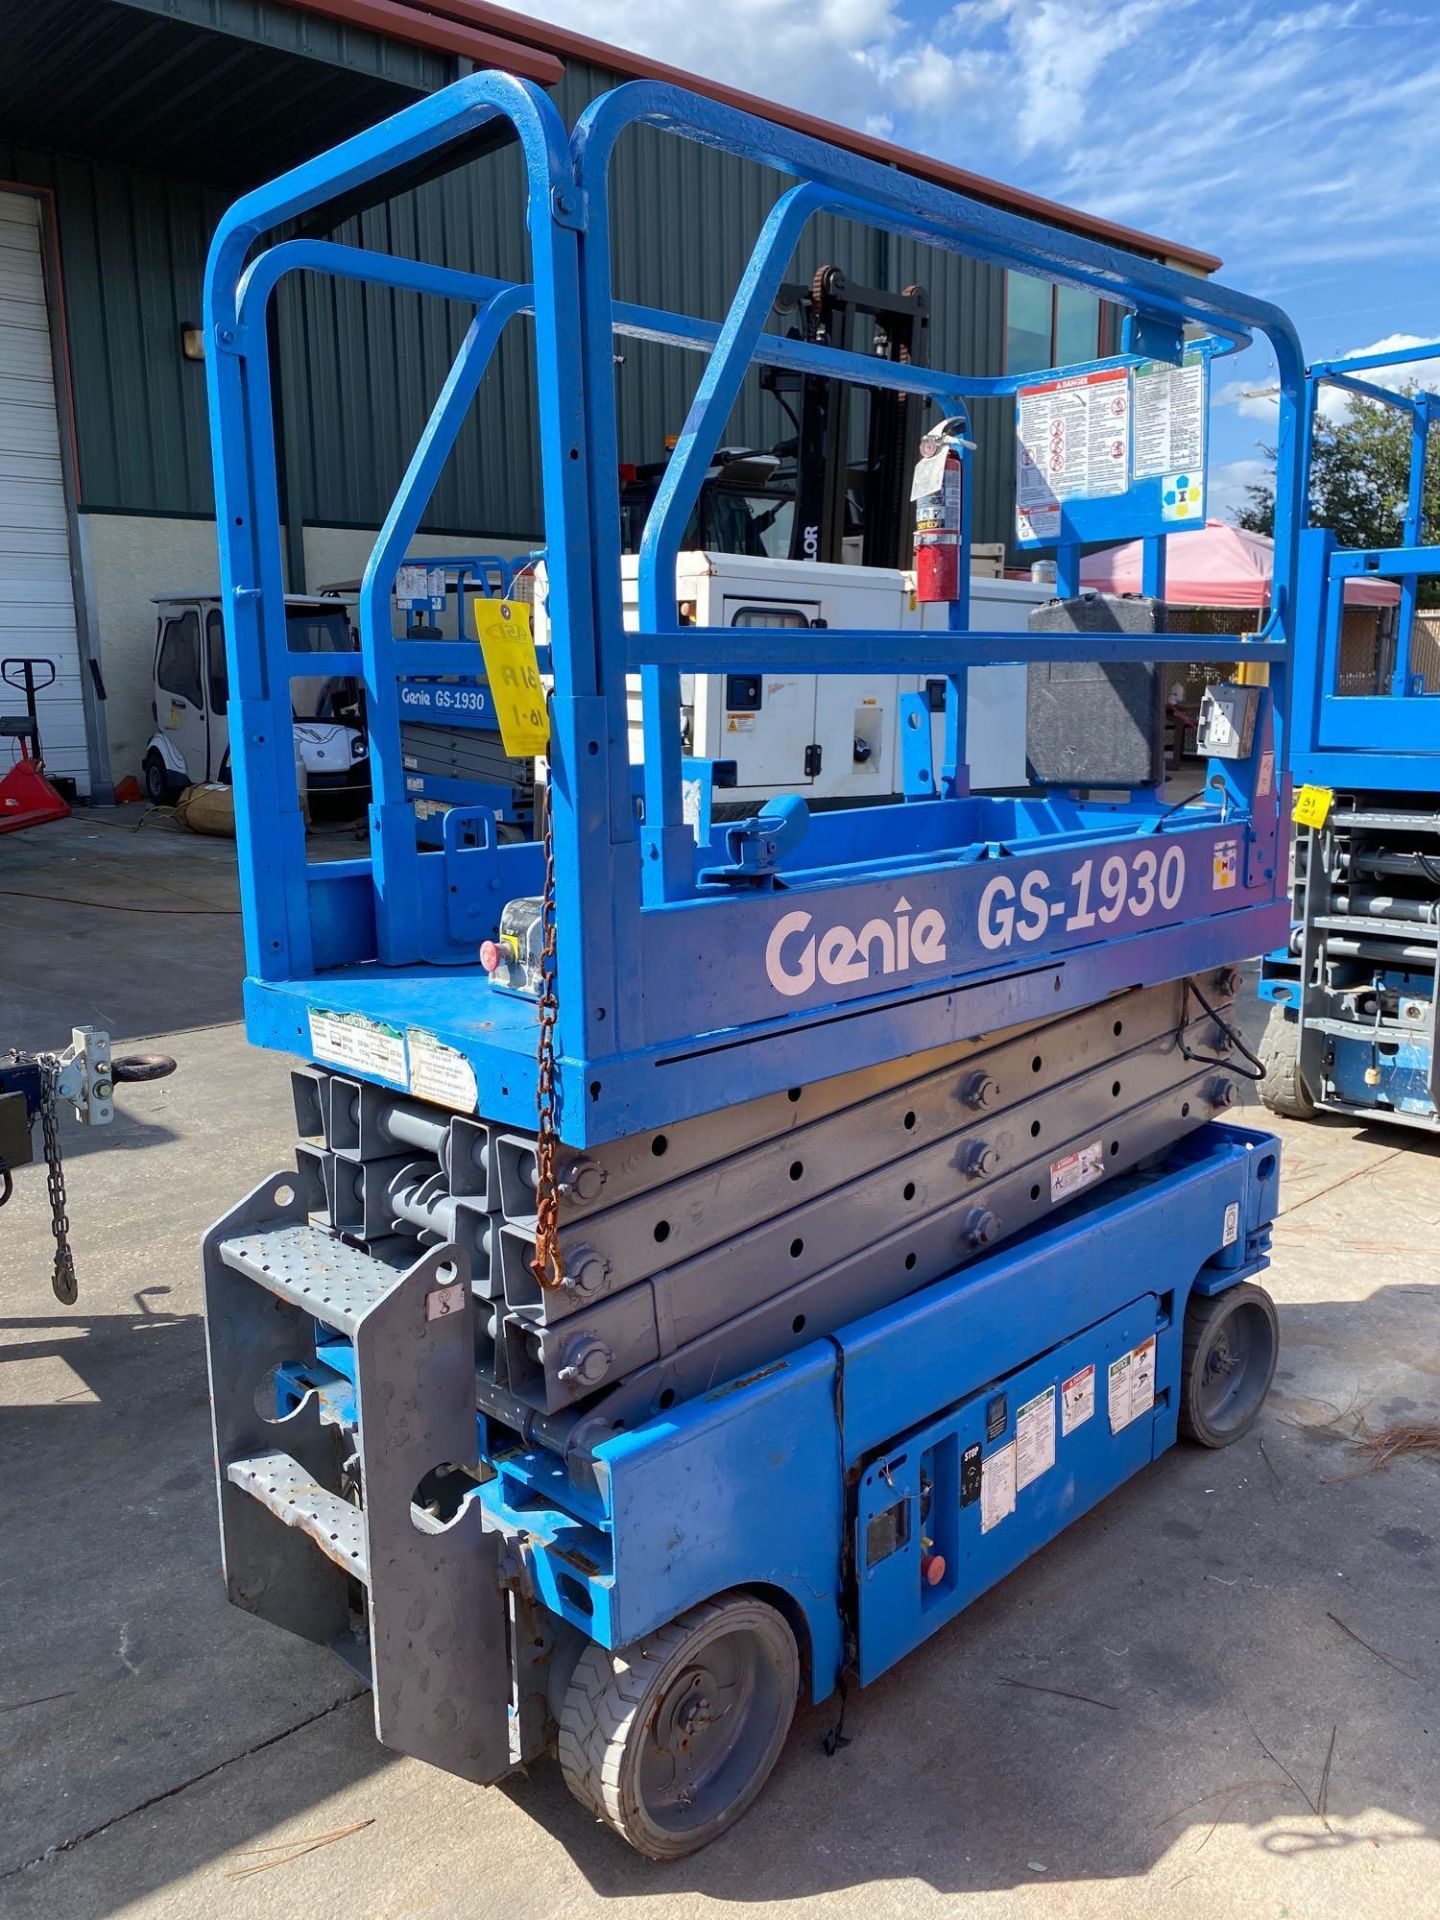 GENIE GS-1930 ELECTRIC SCISSOR LIFT, BUILT IN BATTERY CHARGER, 19' PLATFORM HEIGHT, SELF PROPELLED, - Image 5 of 6